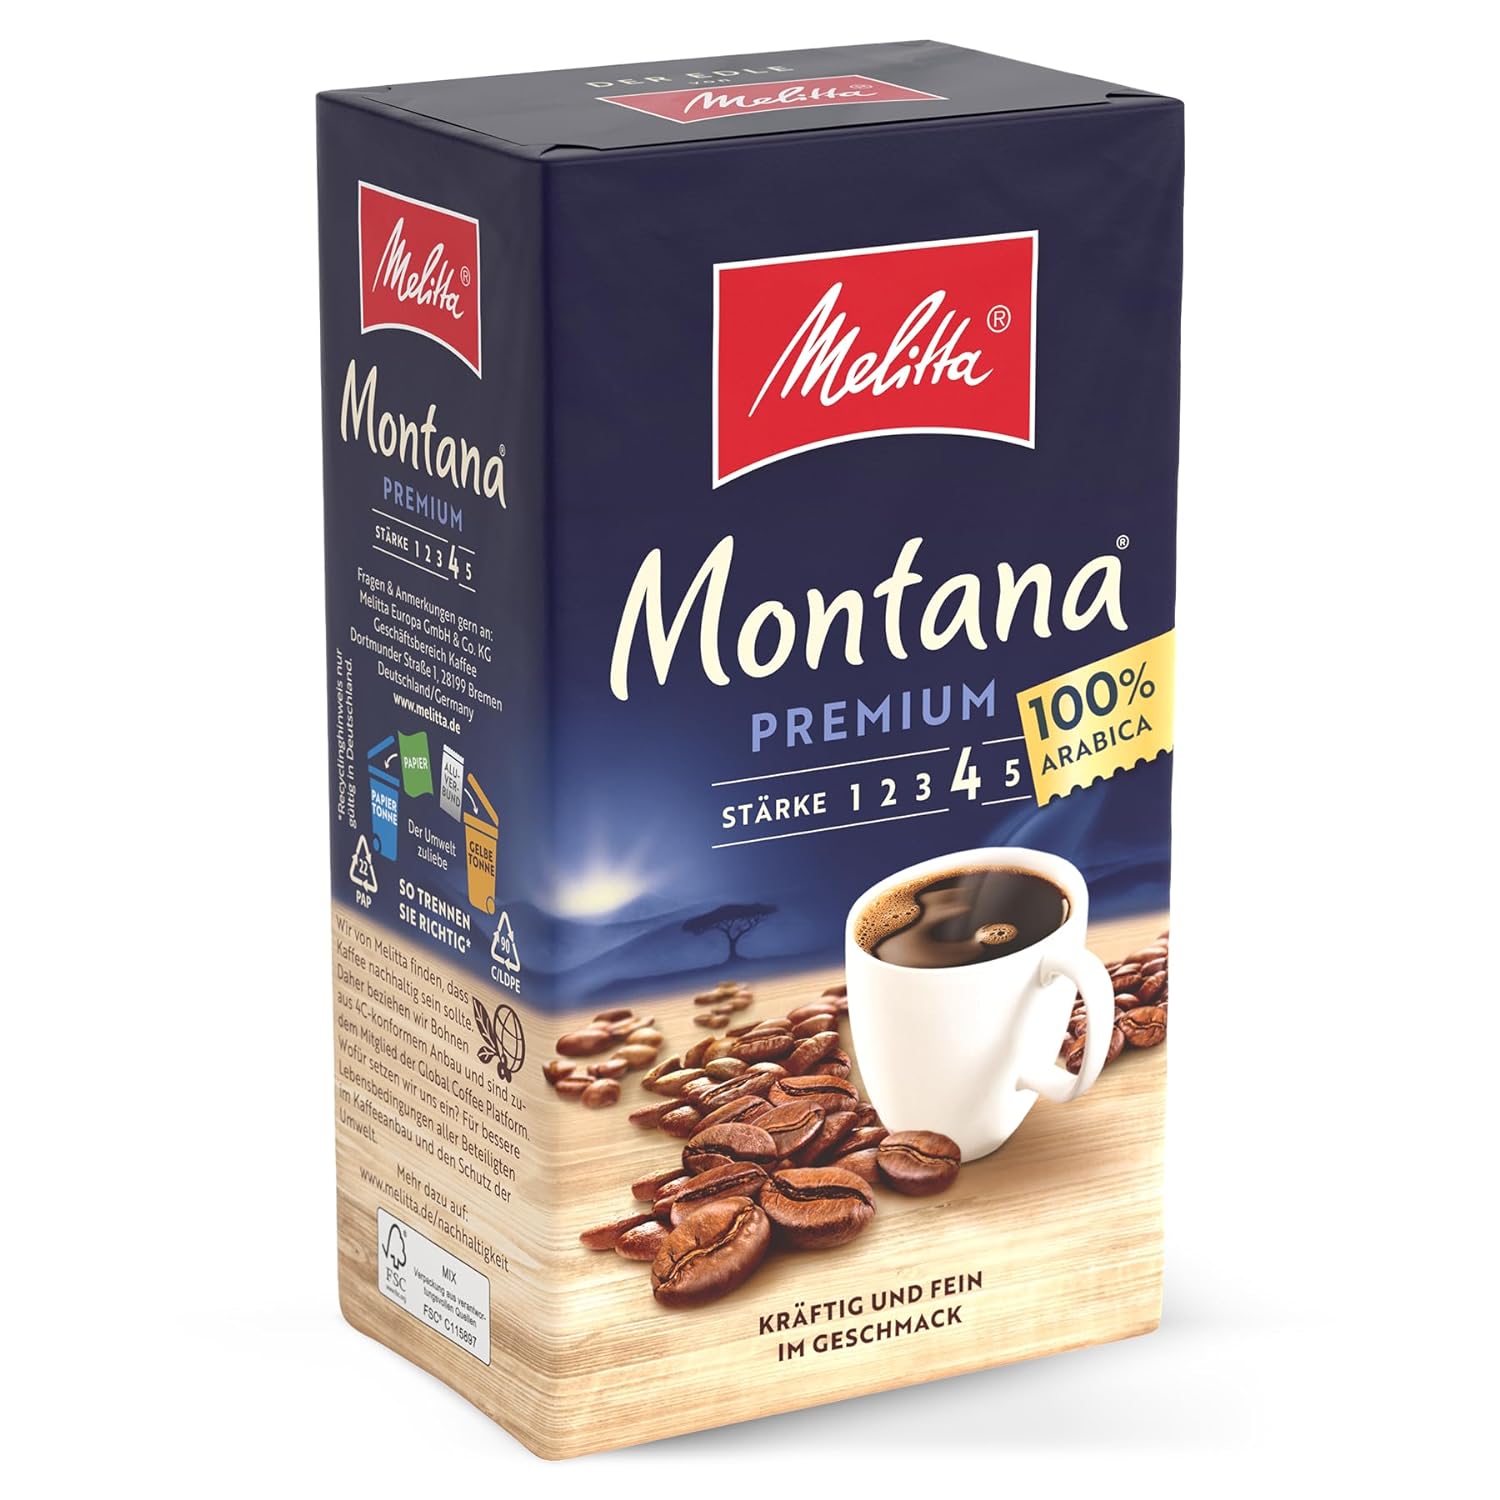 Melitta Montana Premium Filter Coffee 500 g, Ground, Powder for Filter Coffee Machines, 100% Arabica, Strong Roasting, Roasted in Germany